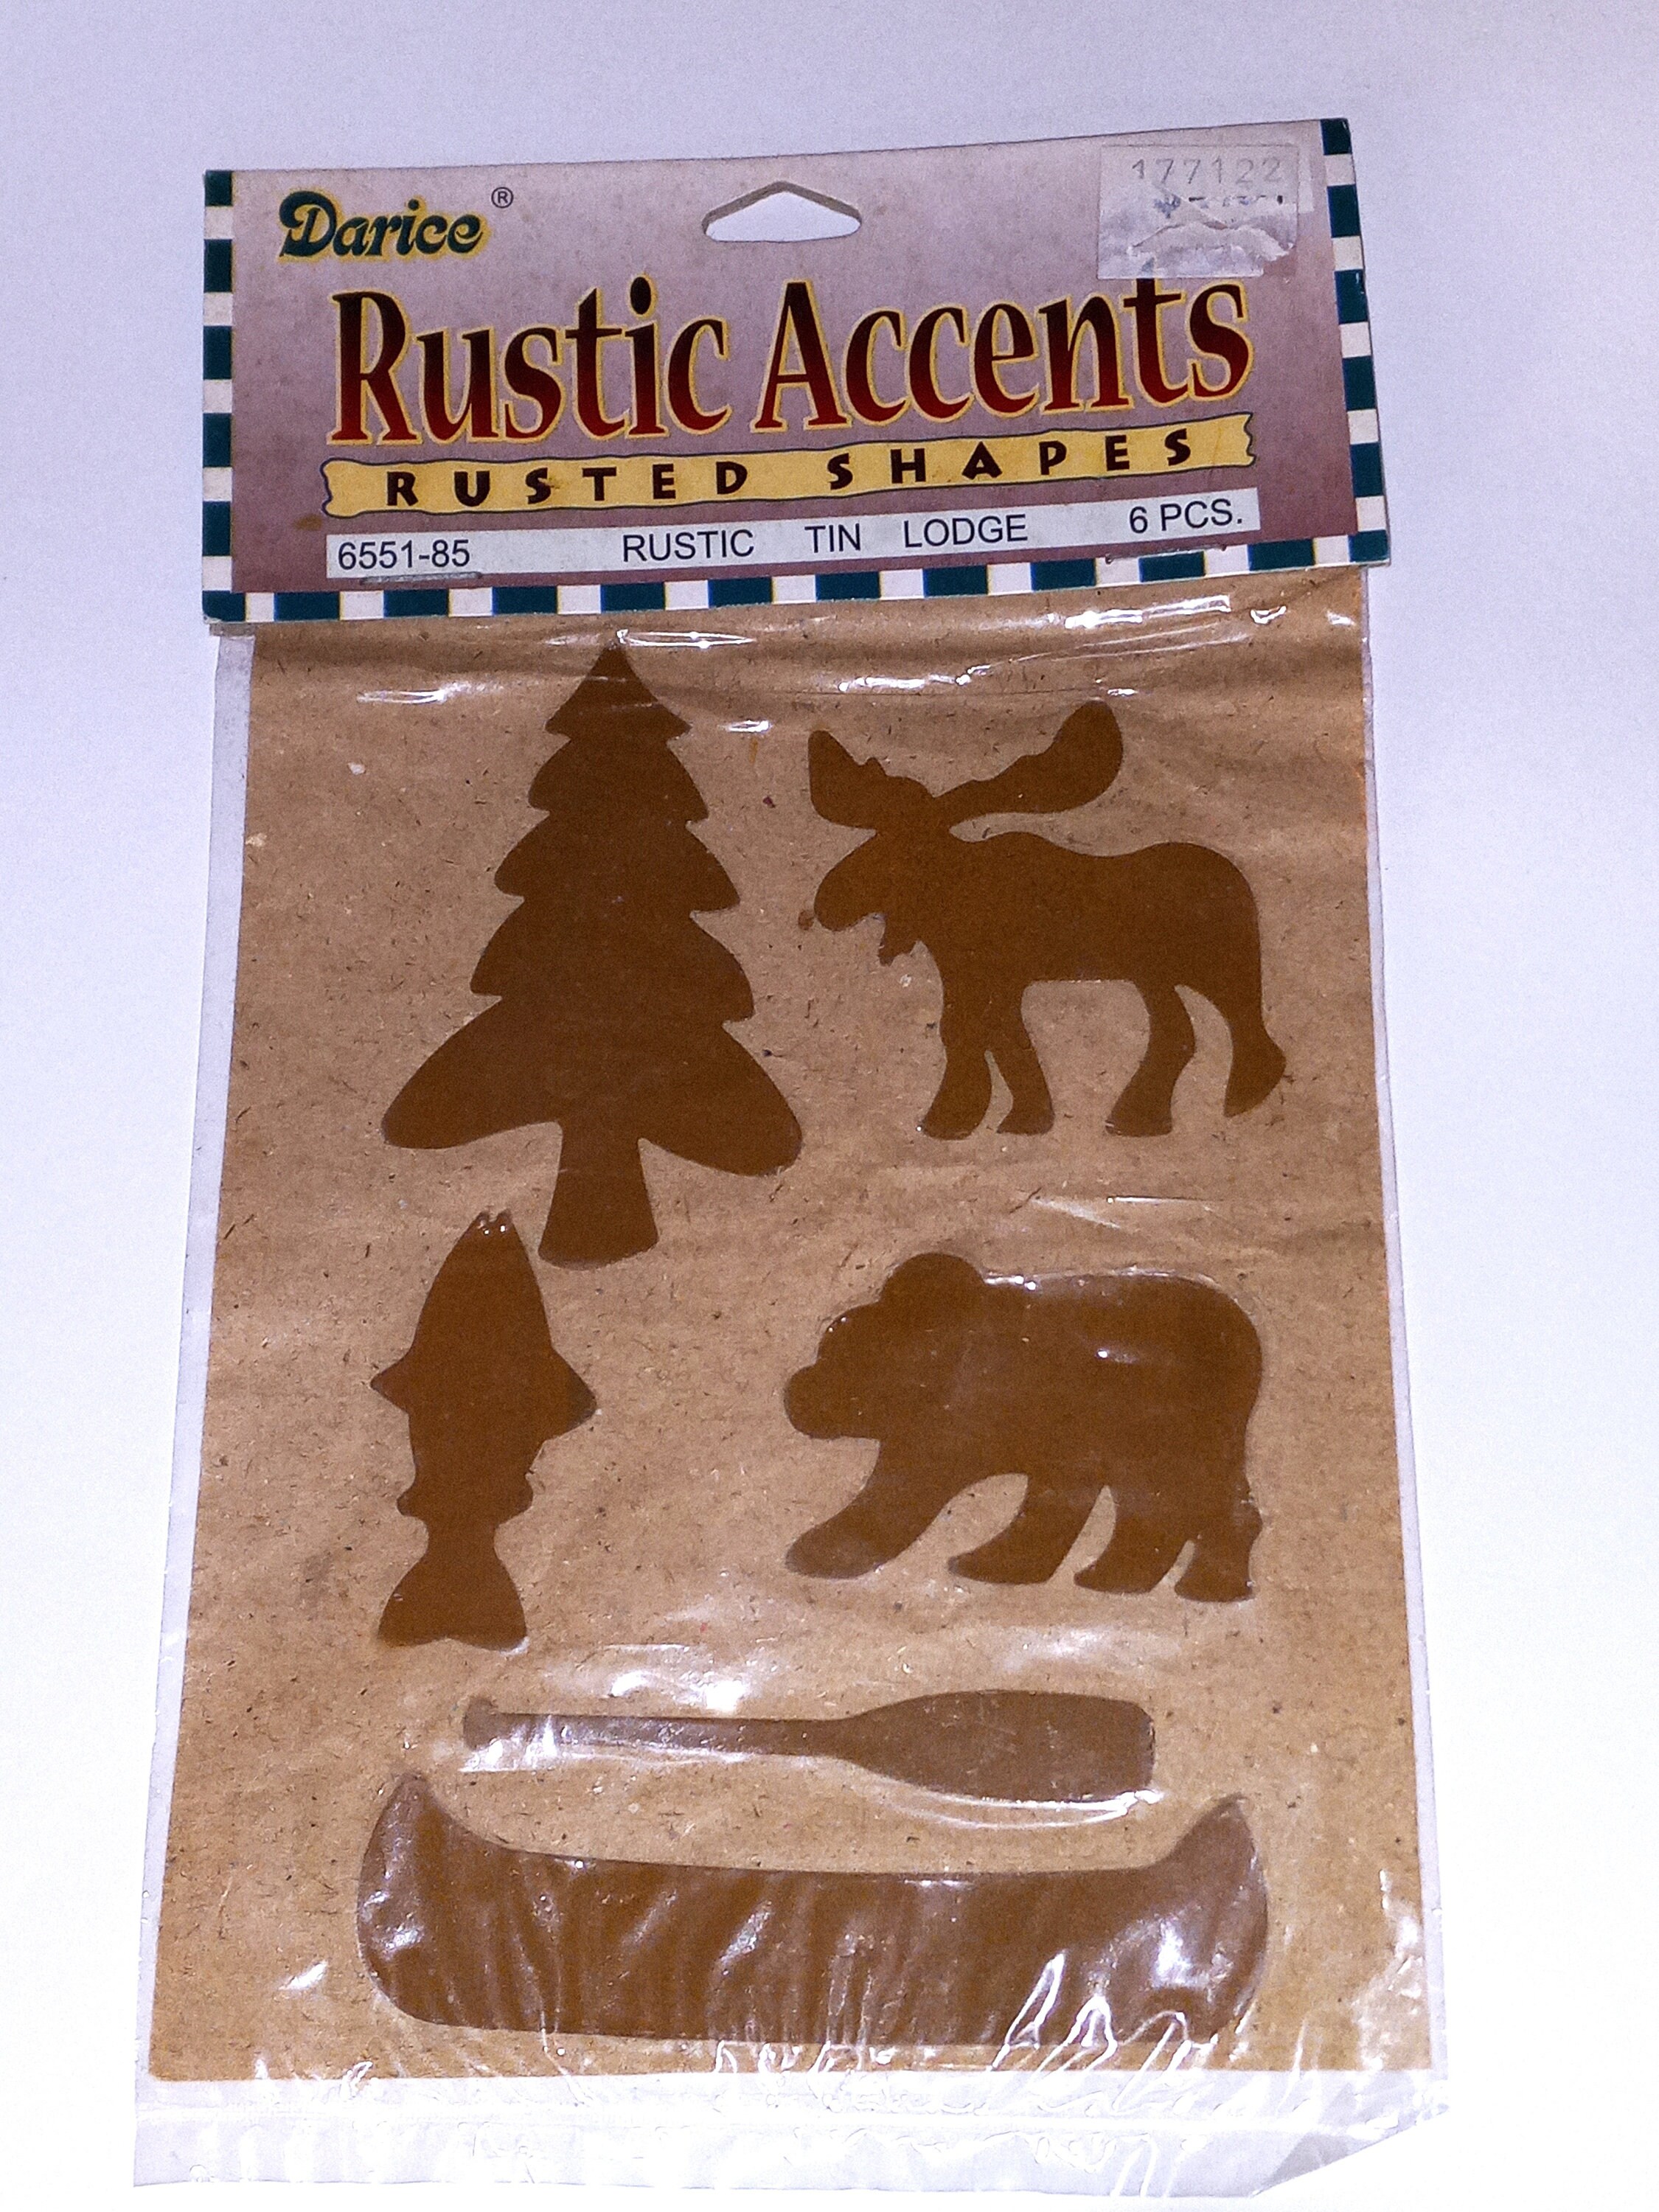 Ranger Glossy Accents, 2 Oz., Dimensional Medium, Scrapbooking, Card  Making, Mixed Media, Paper Crafting, Adhesive, Clear 